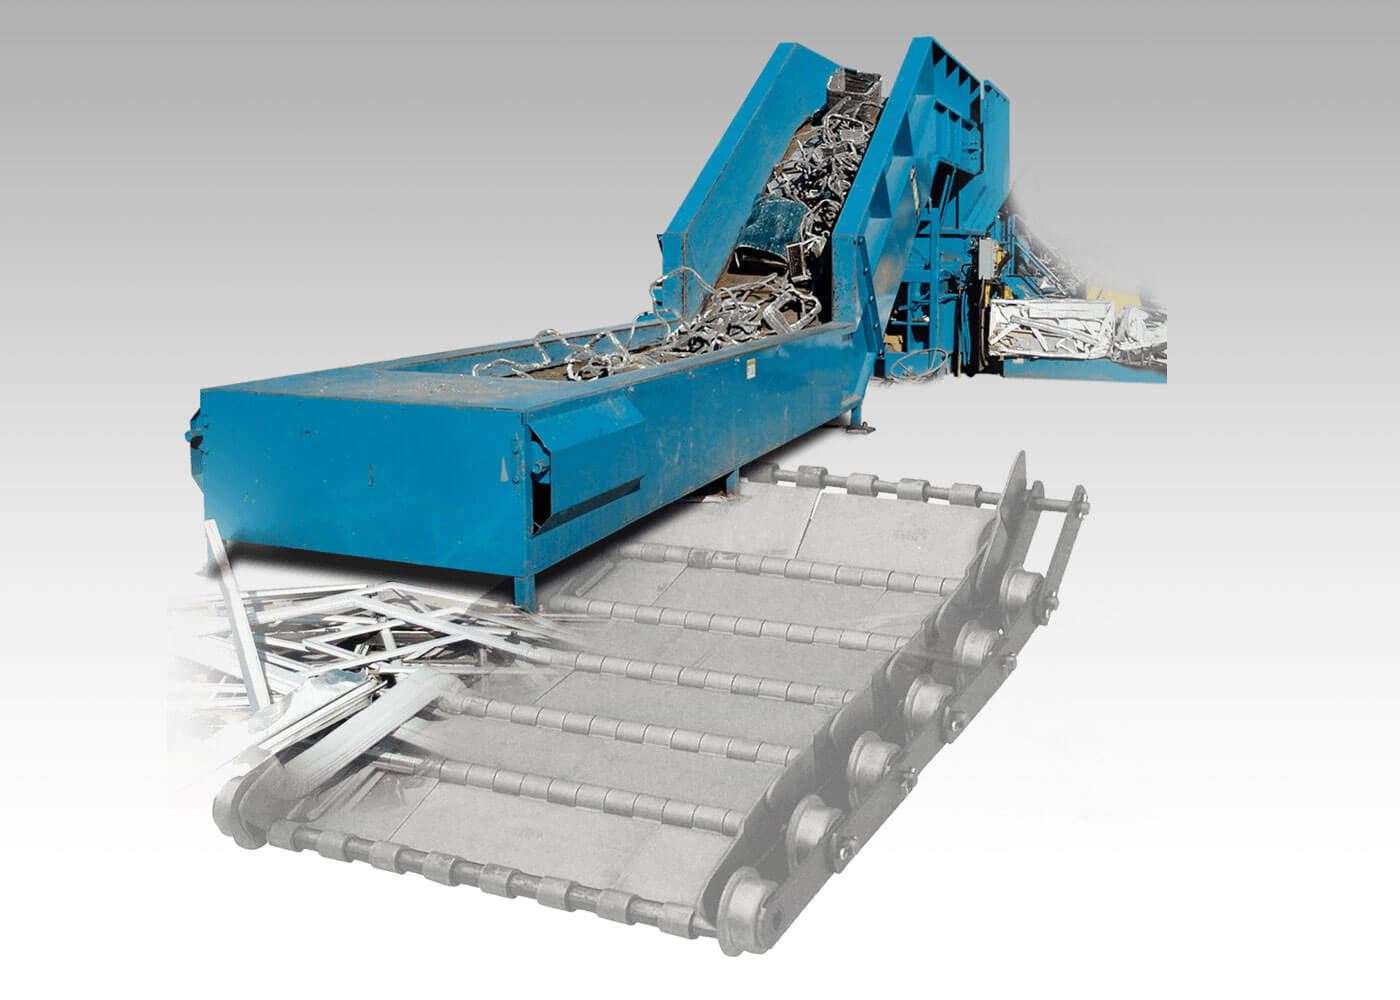 Galaxy two ram horizontal recycling baler conveyors and conveyor systems for recycling centers